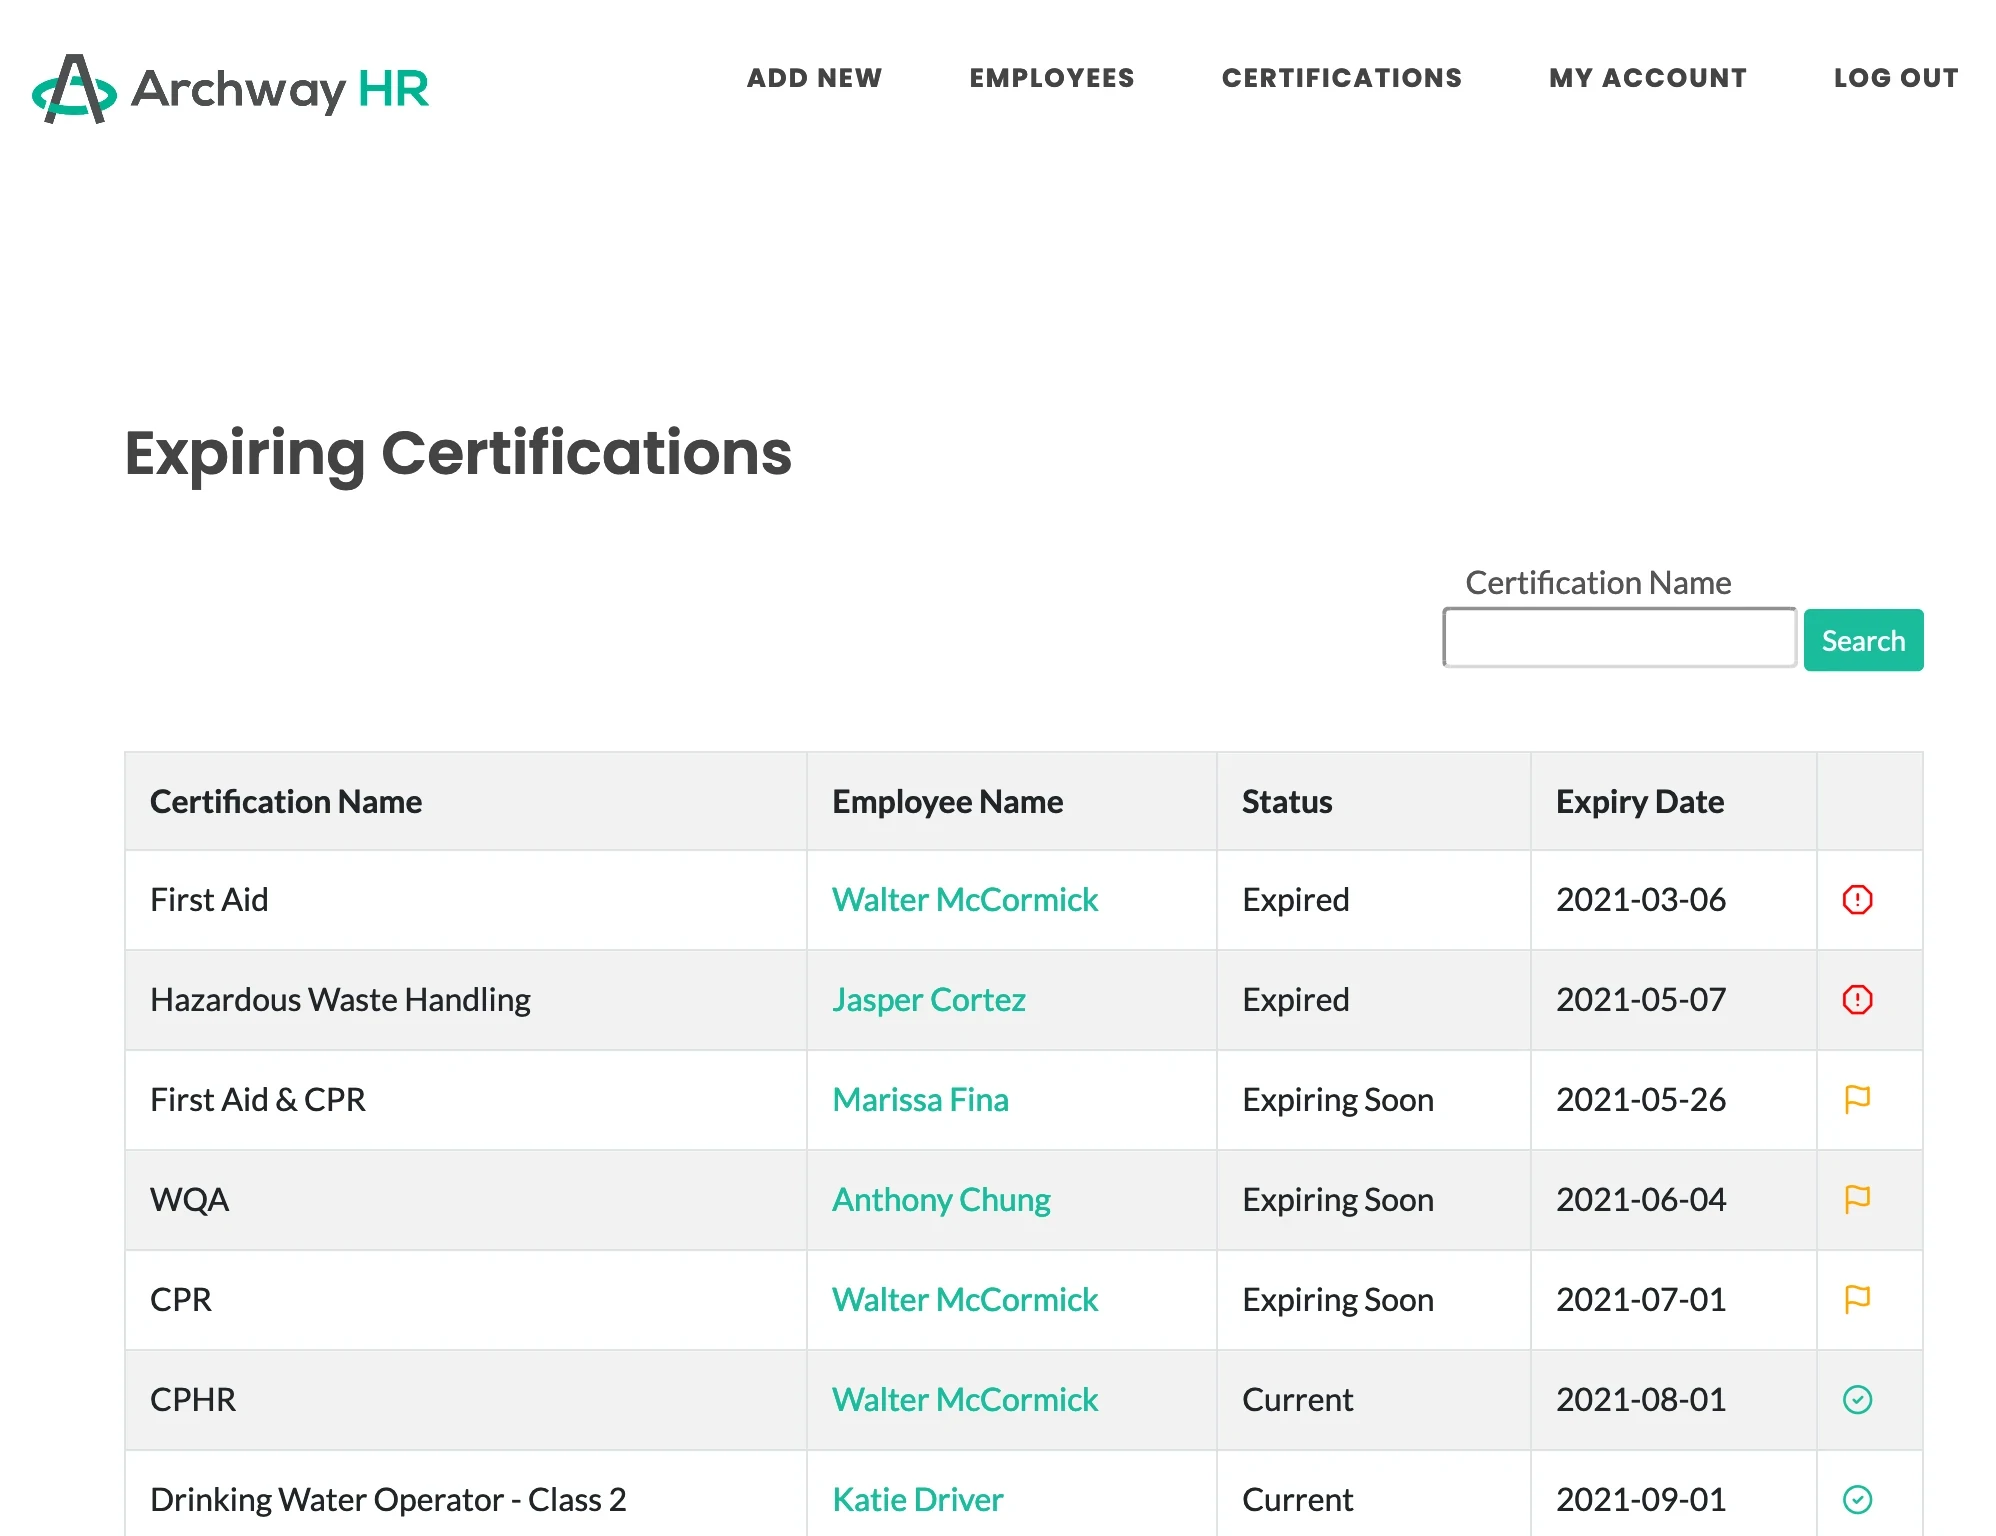 Tracking employee certifications